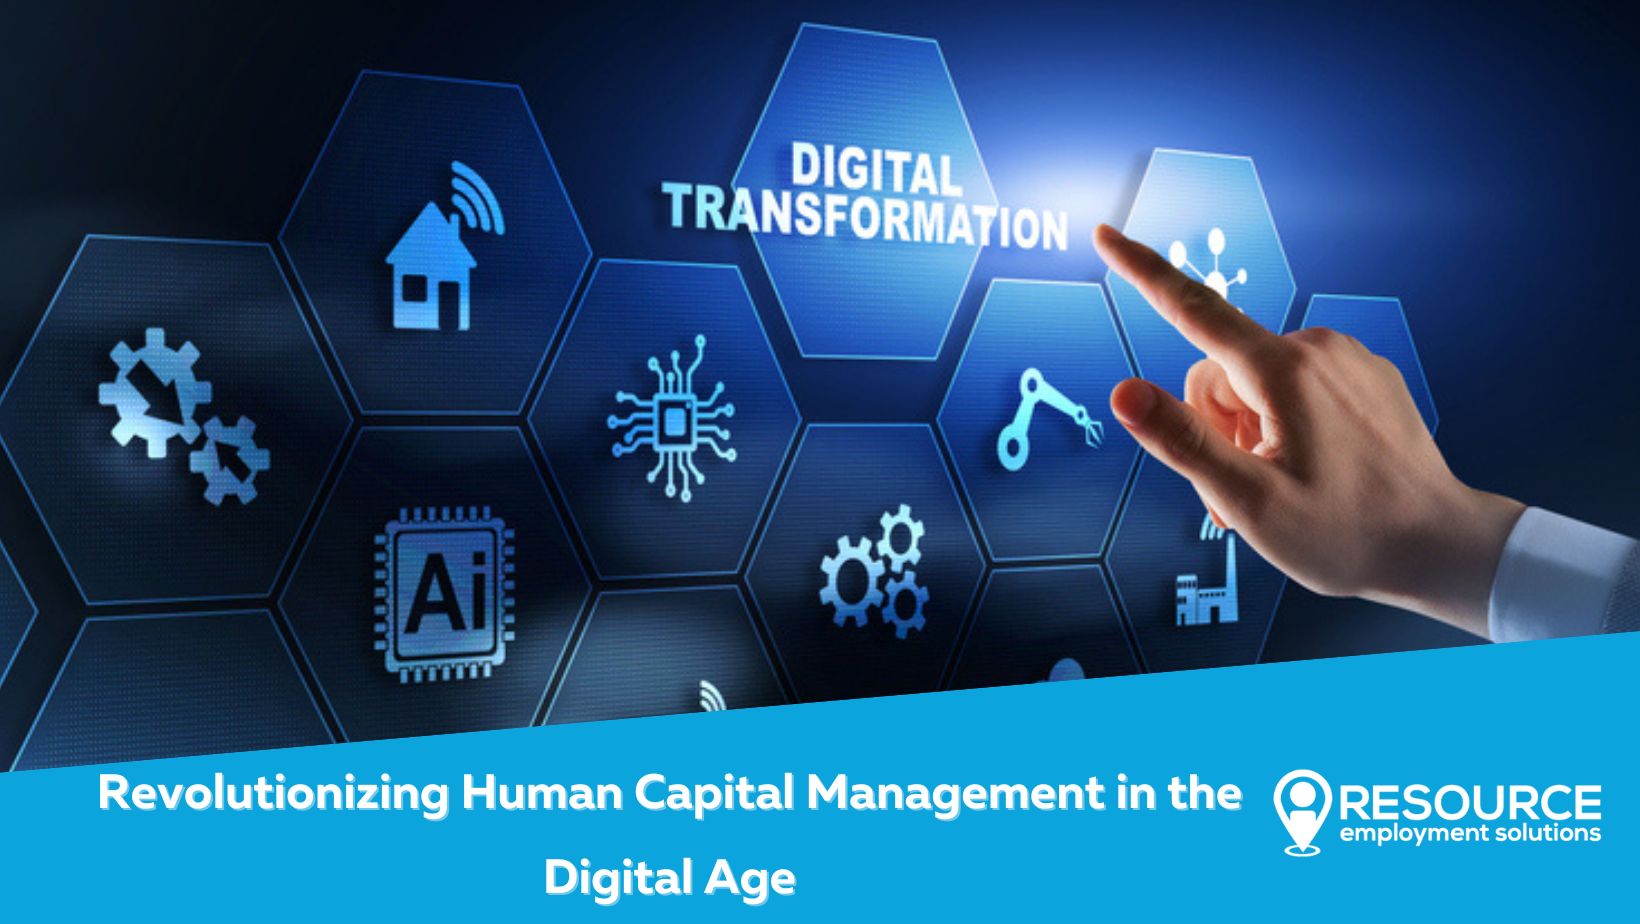 Revolutionizing Human Capital Management in the Digital Age